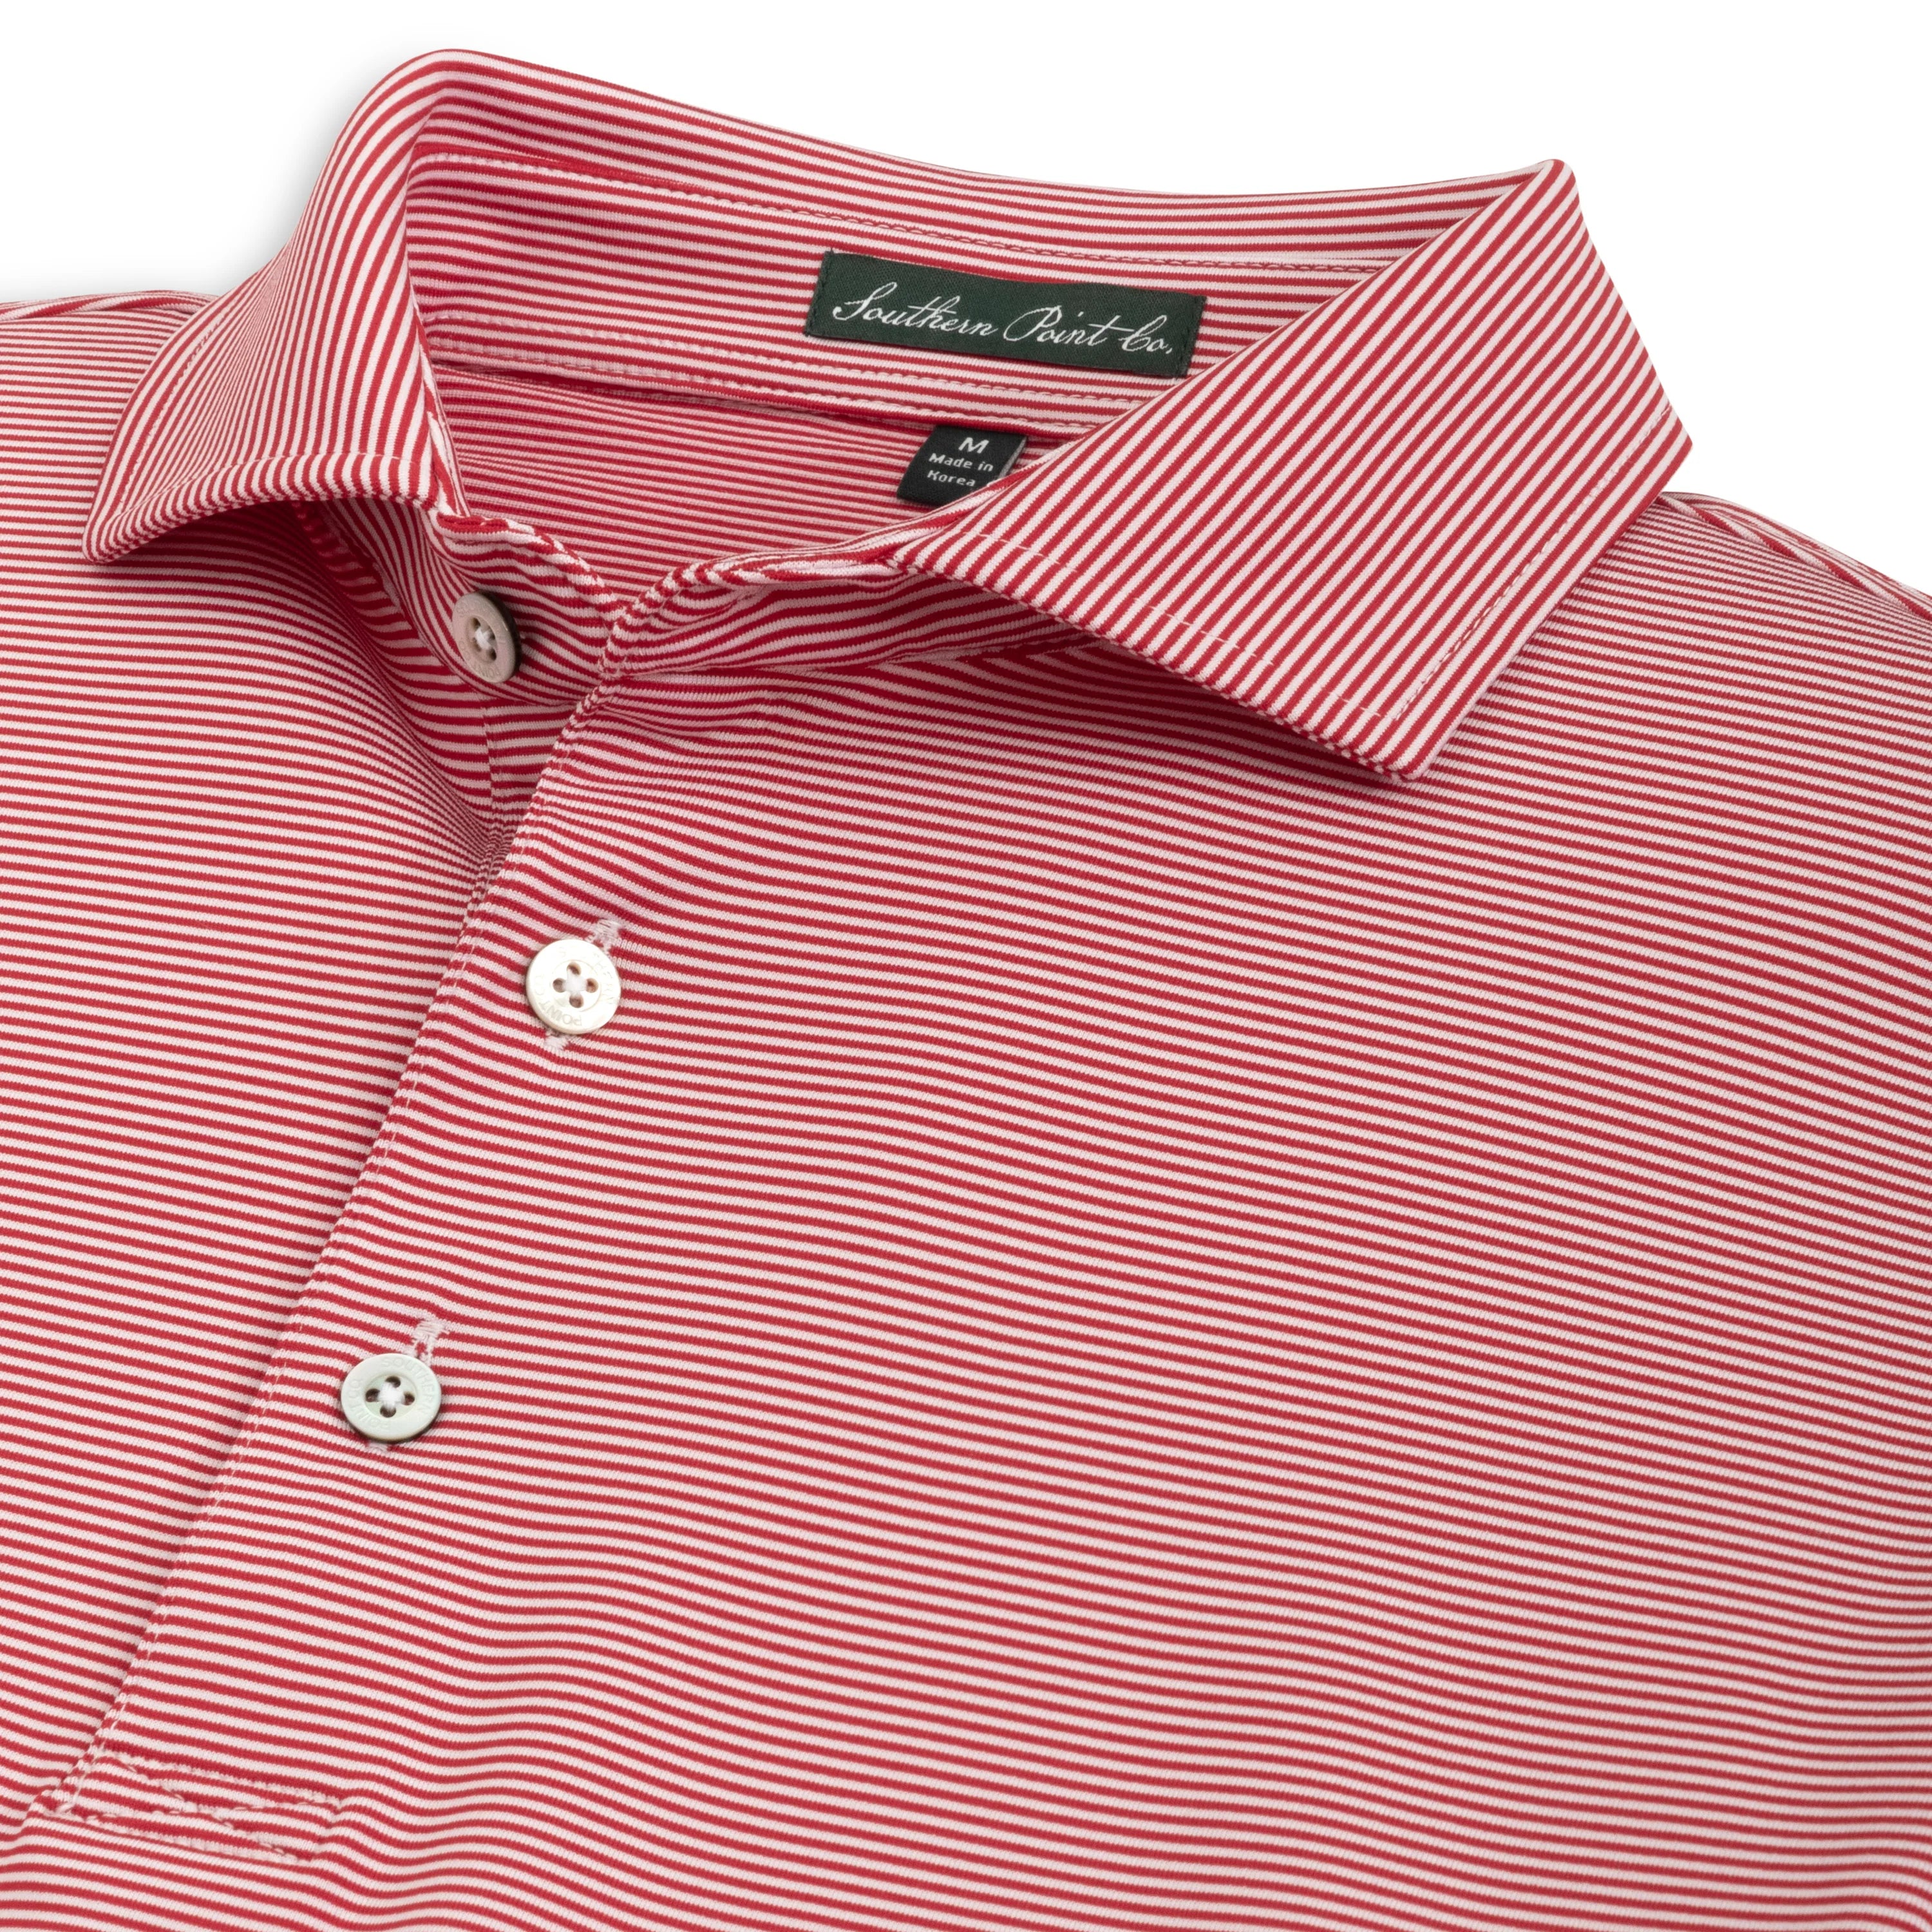 Hinton Stripe Polo in Crimson by Southern Point Co.